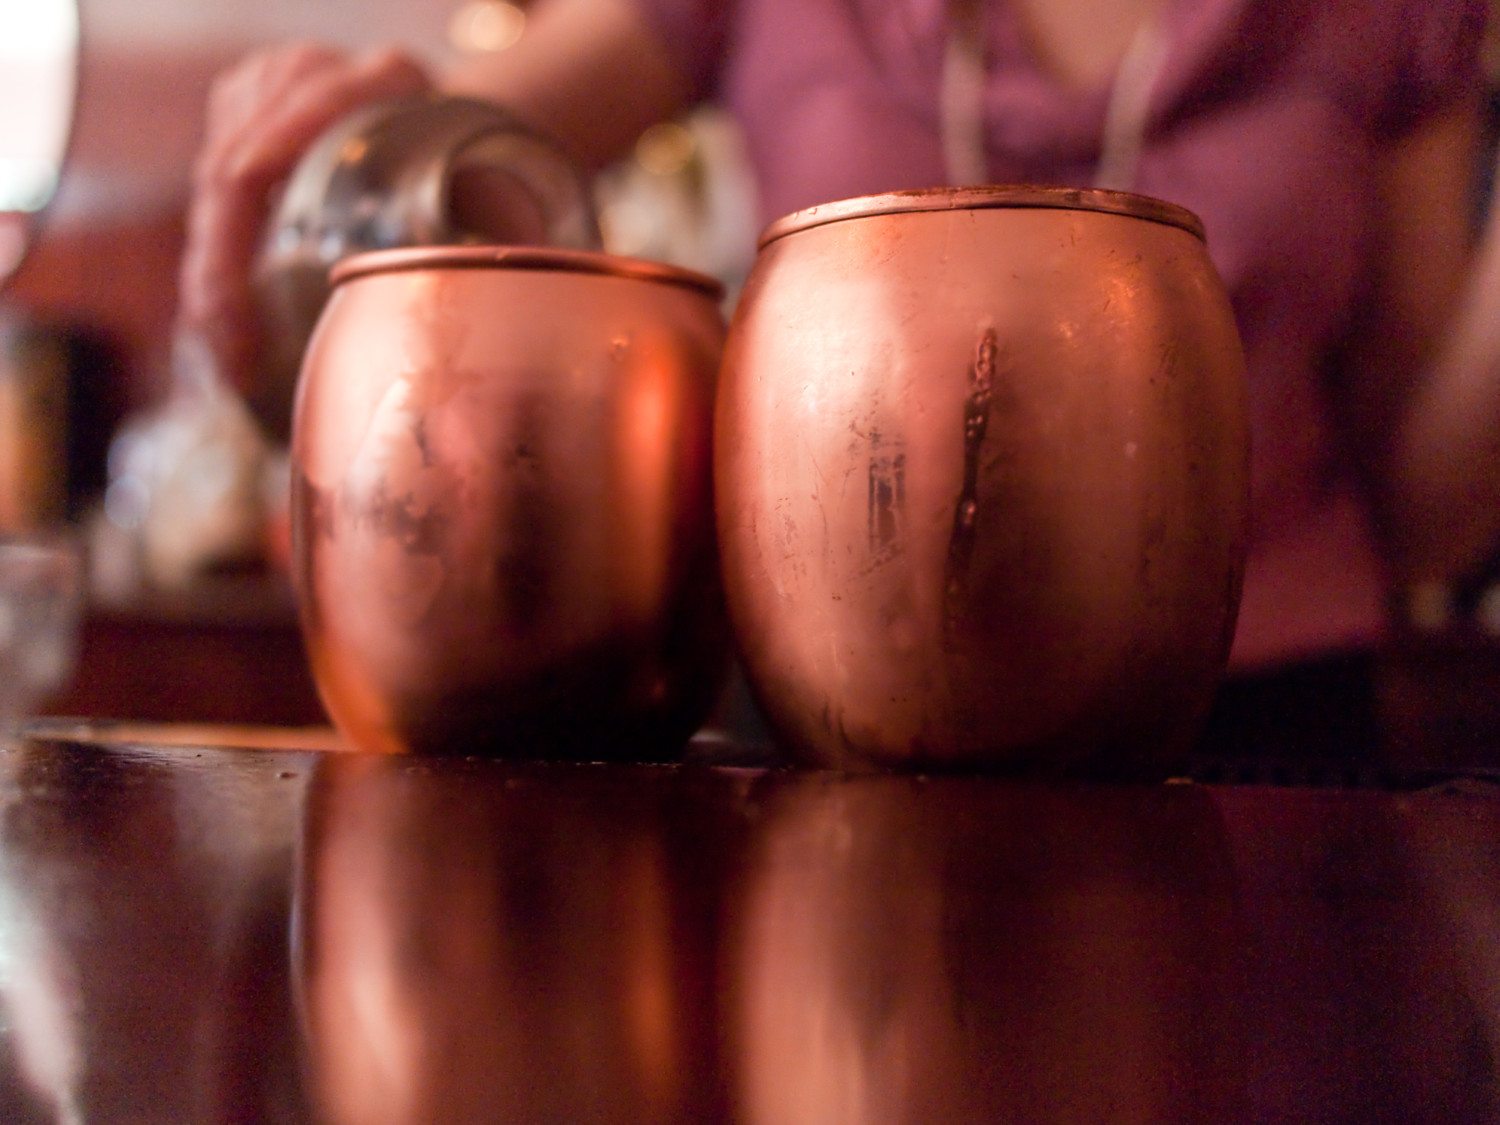 moscow mule photo